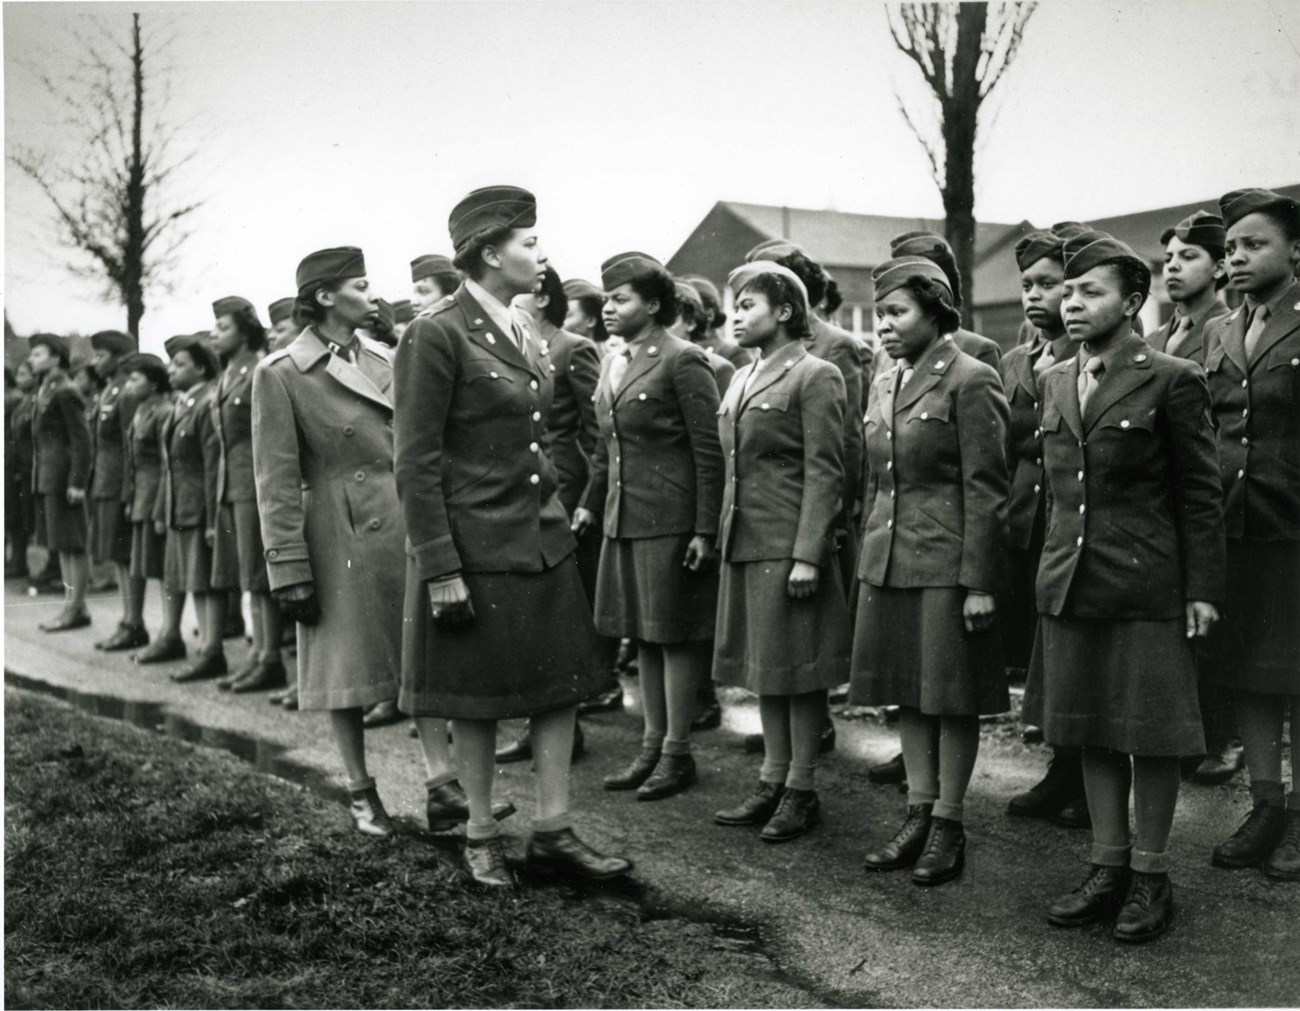 Black and white photo of two African American women officers inspecting African American women soldiers during WW2. They are all wearing WW2 Military uniforms.